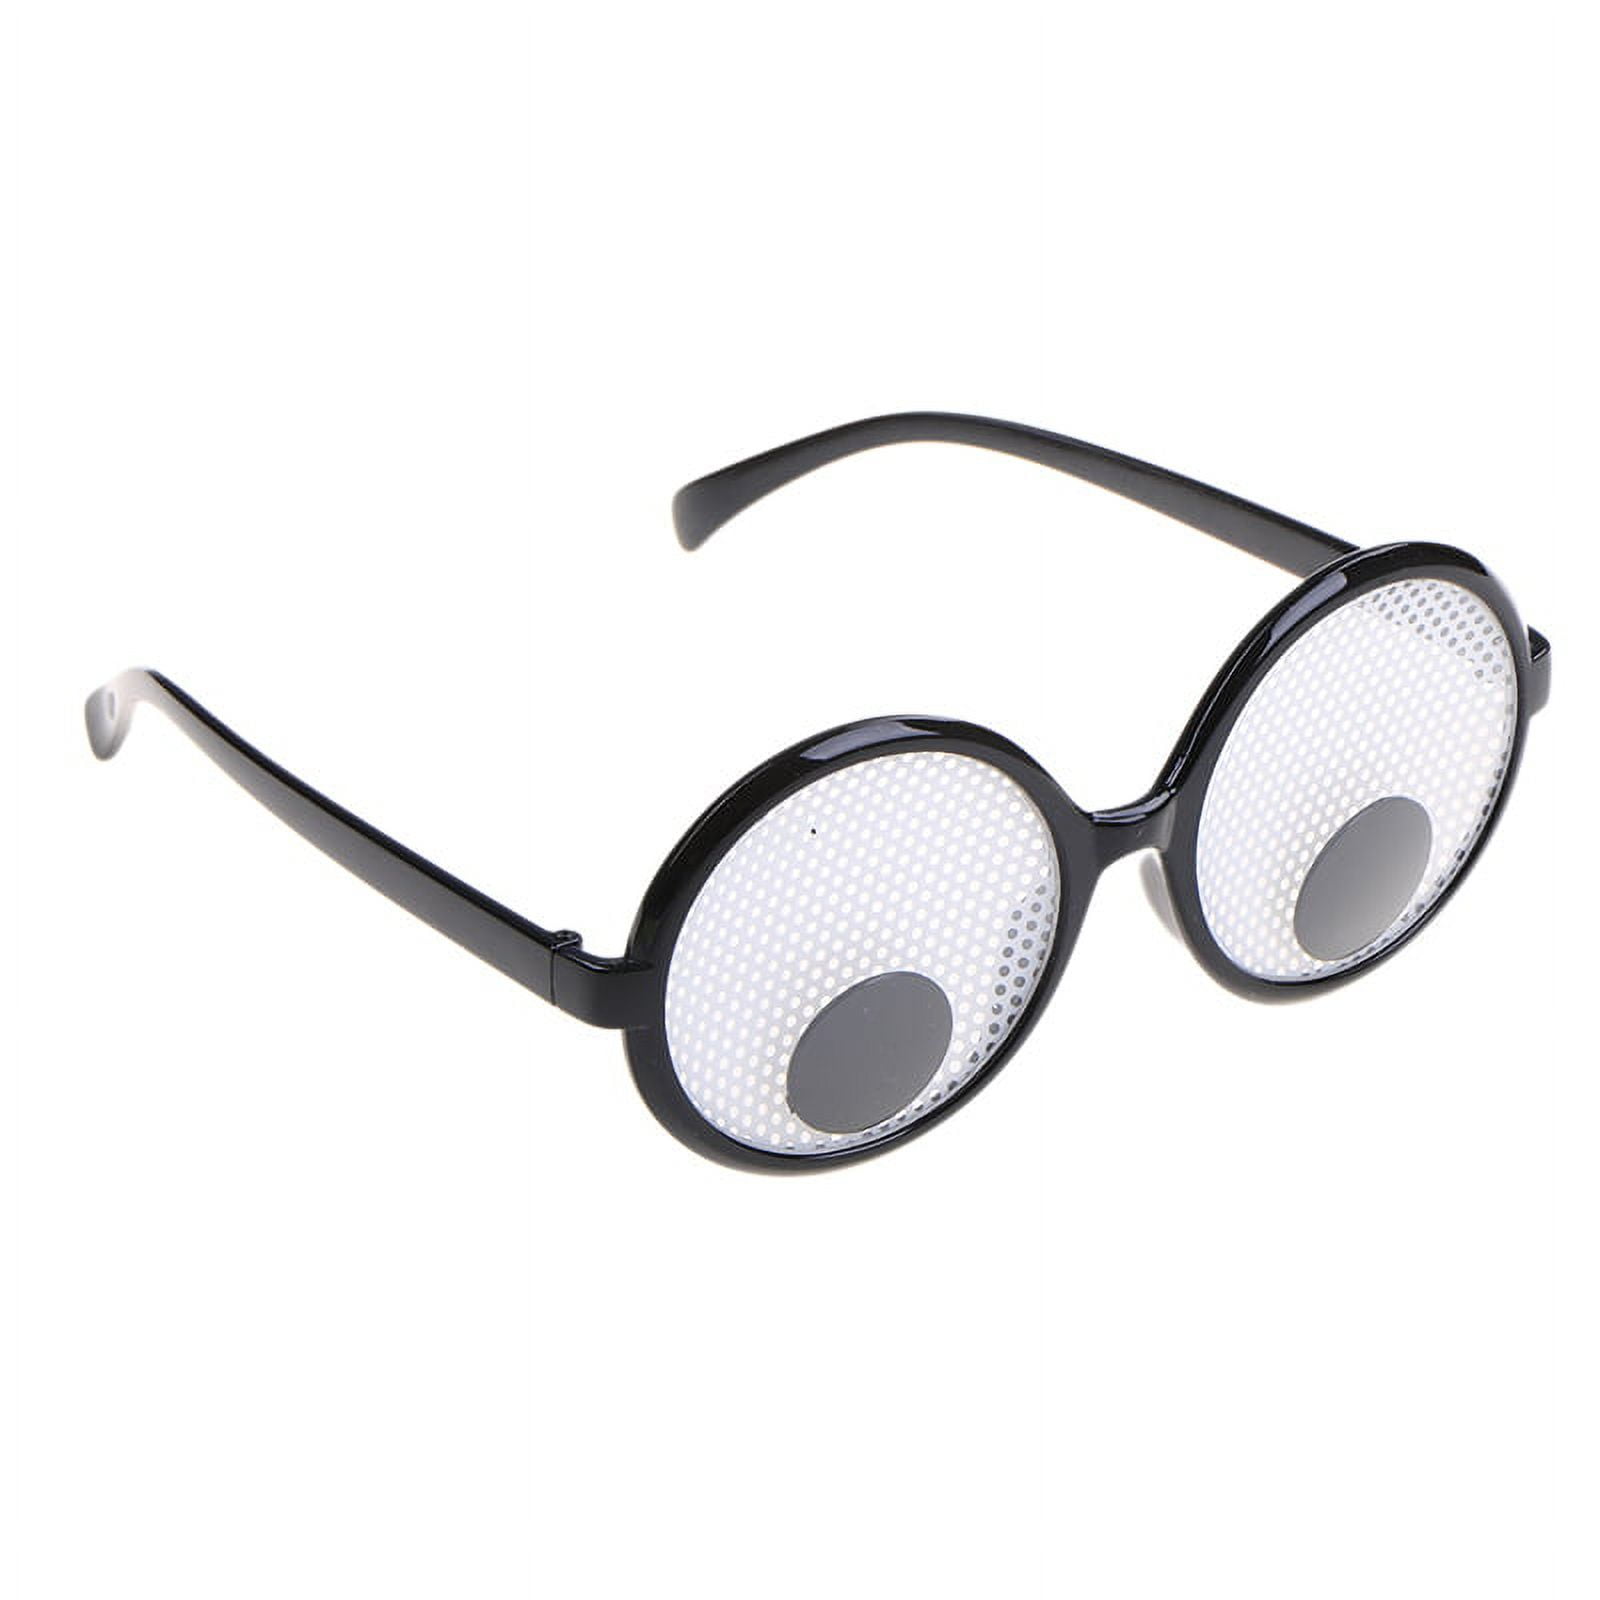 Googly Eye Glasses Stock Photos and Pictures - 37 Images